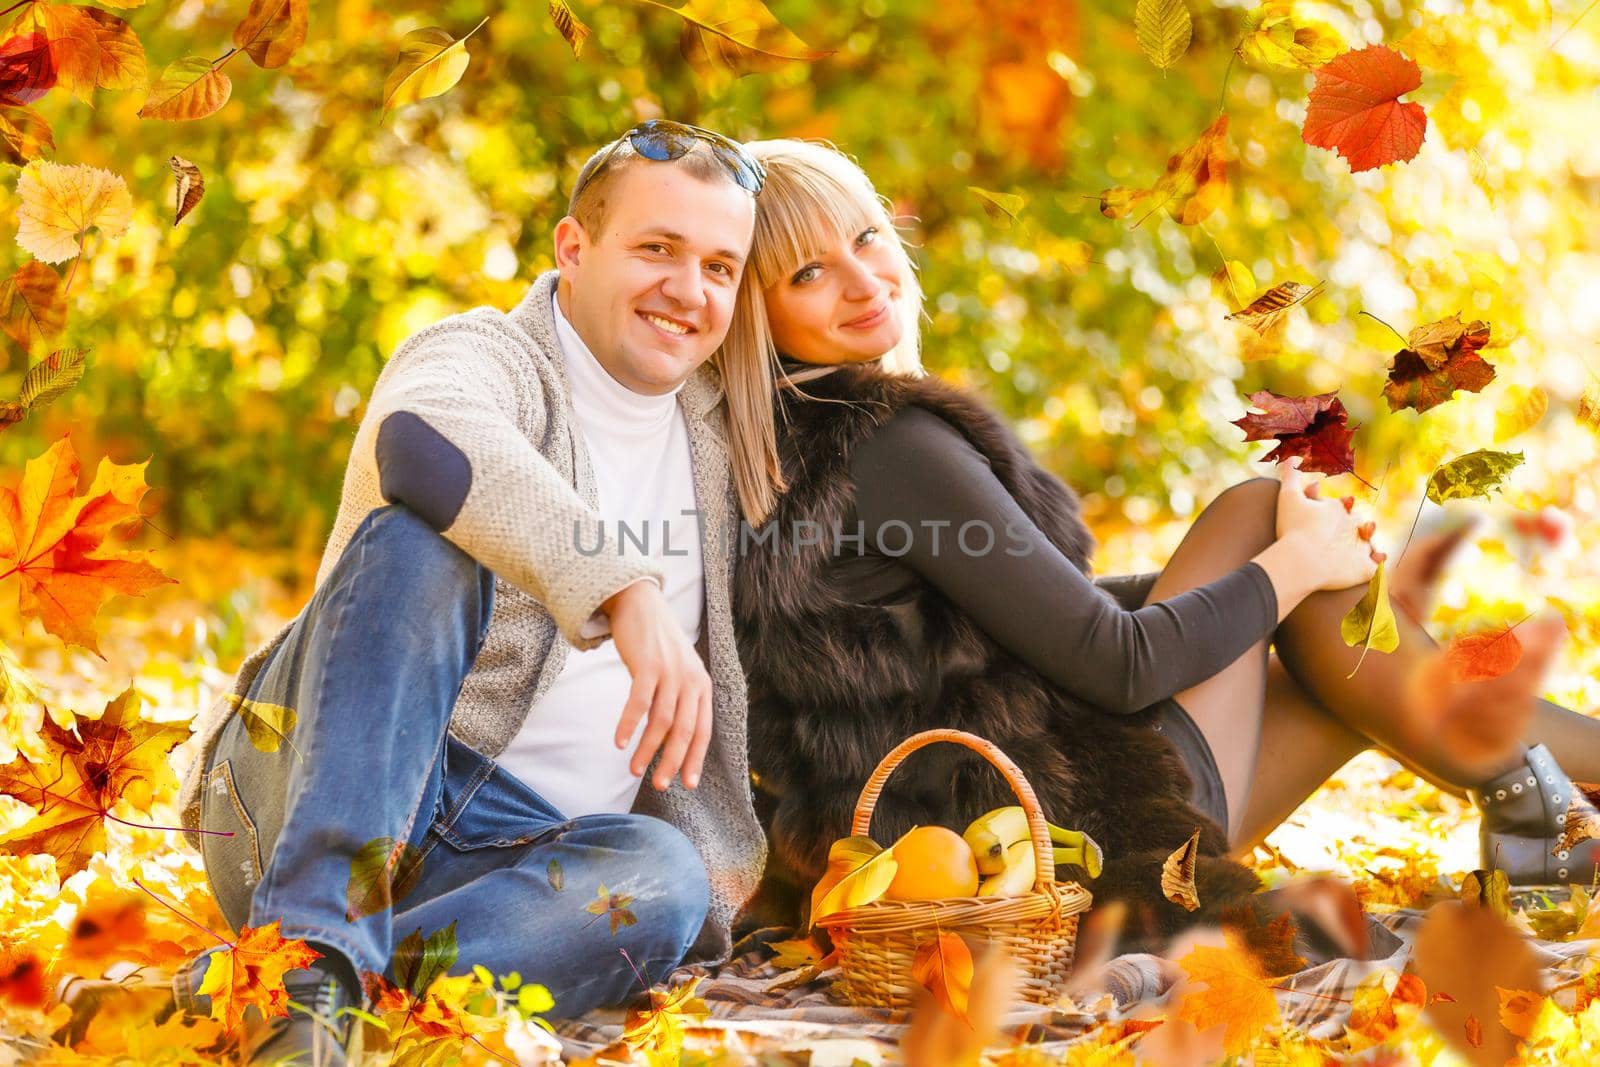 Young couple in love holding hands and walking through a park on a sunny autumn day. High quality photo